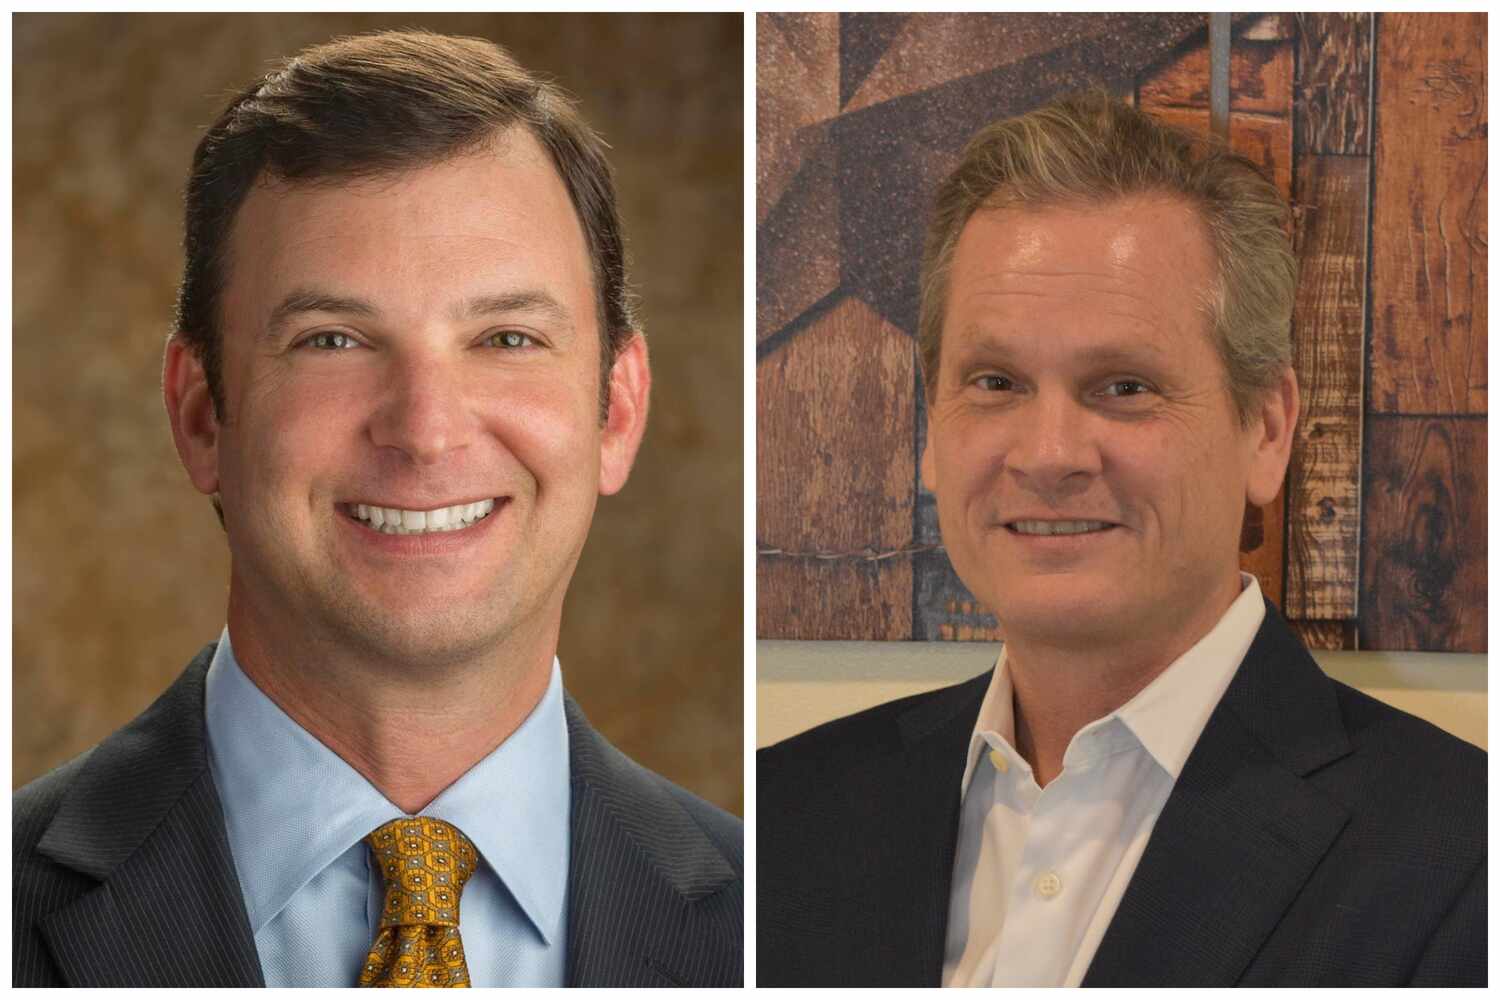 State Rep. Craig Goldman, left, and Fort Worth businessman John O’Shea are competing in the...